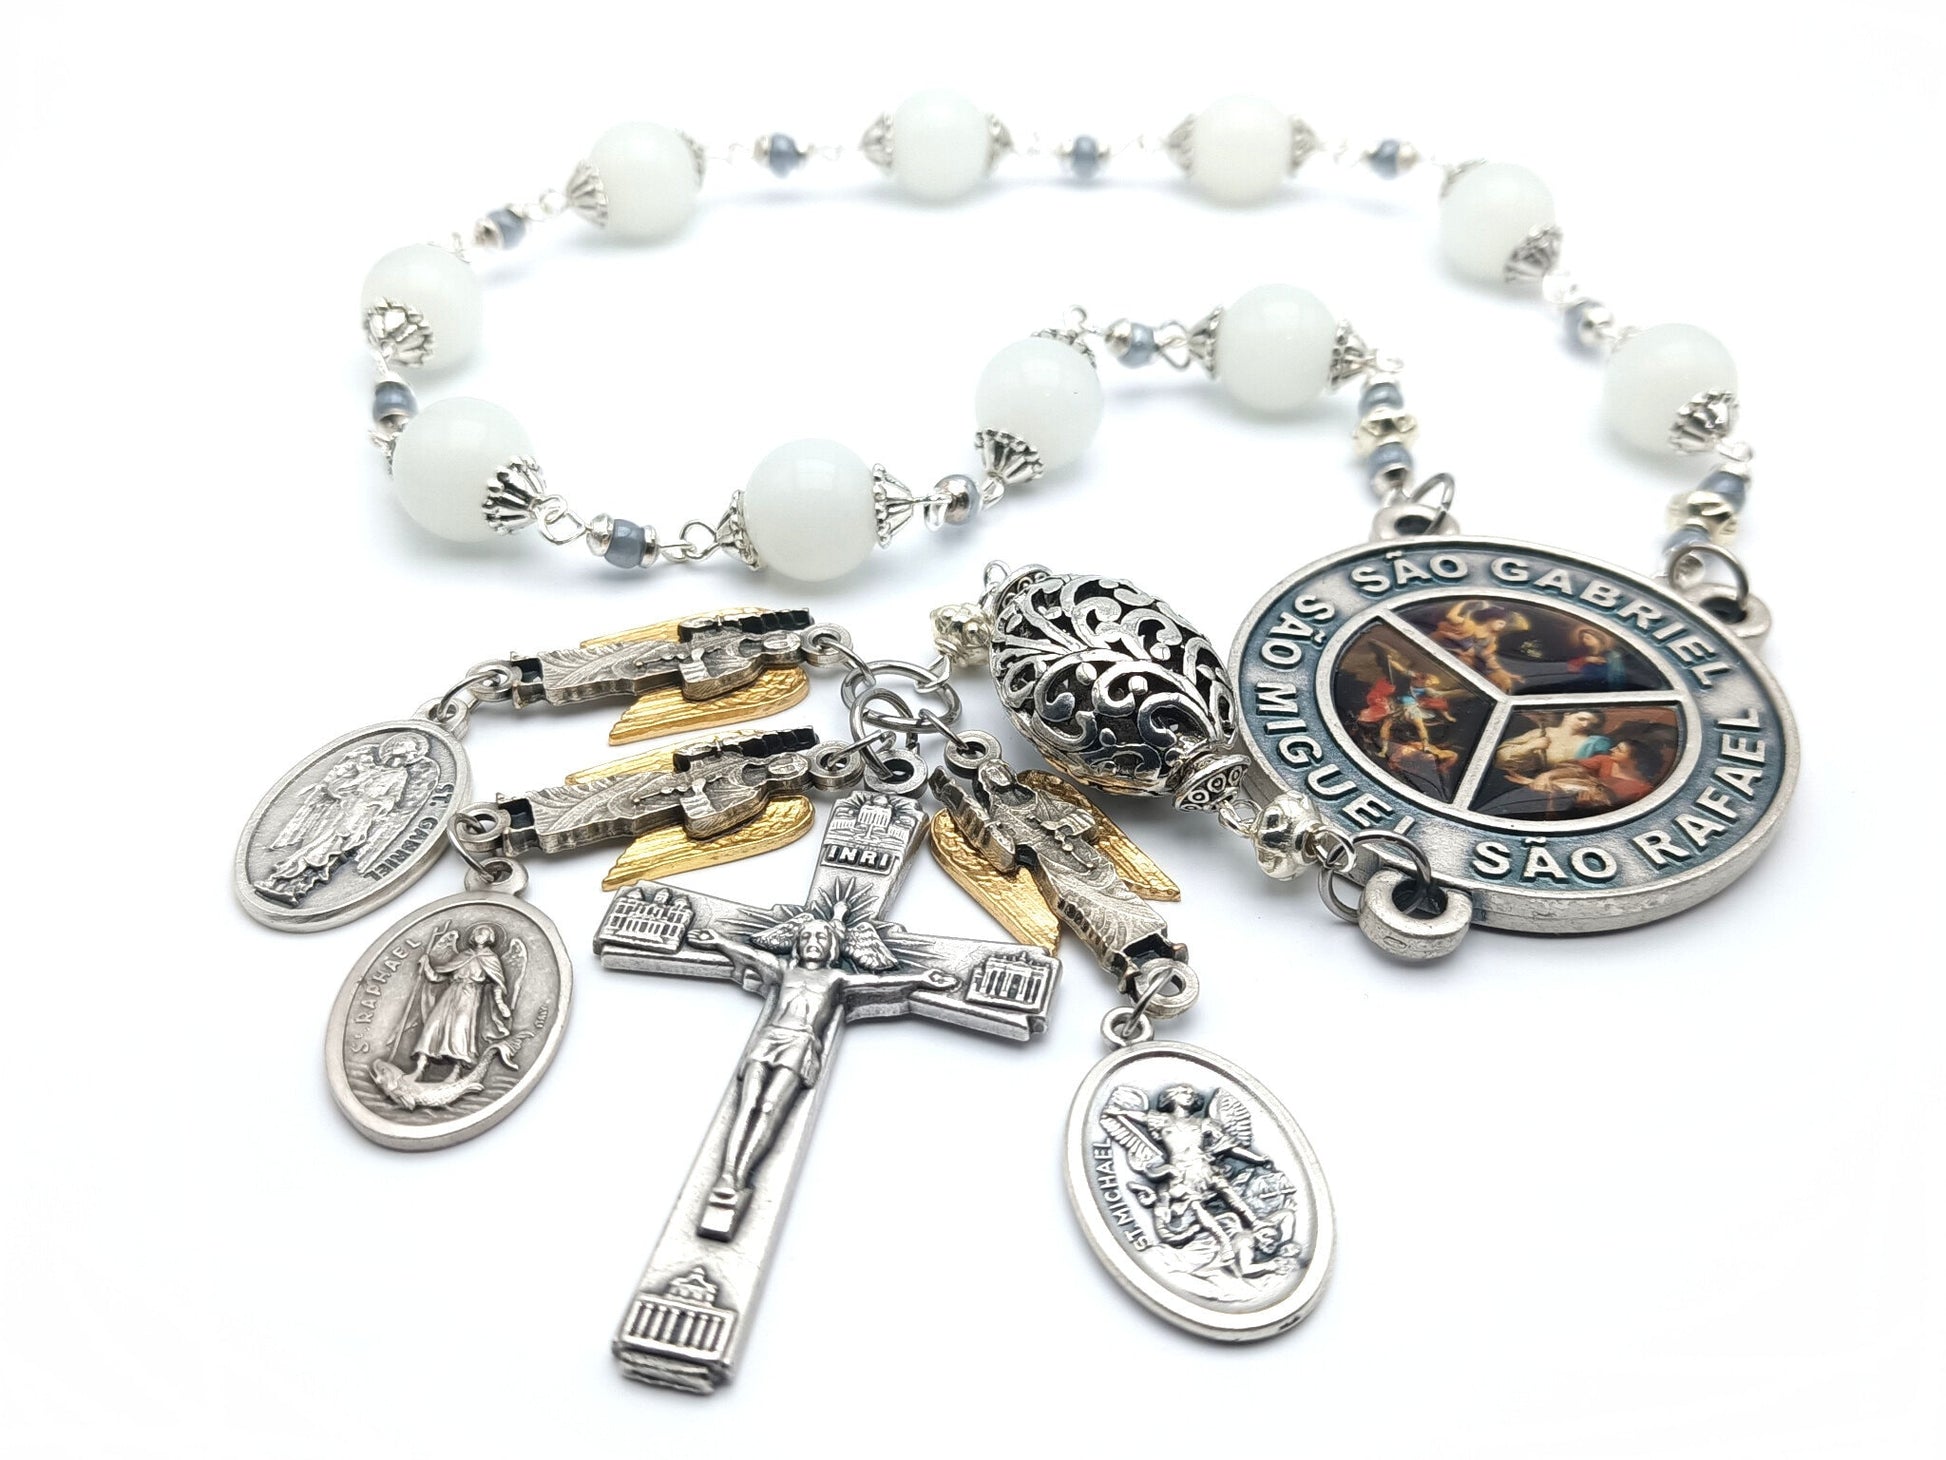 Archangels unique rosary beads single decade or tenner with opal gemstone beads, silver basilica crucifix, picture centre medal and archangels medals.